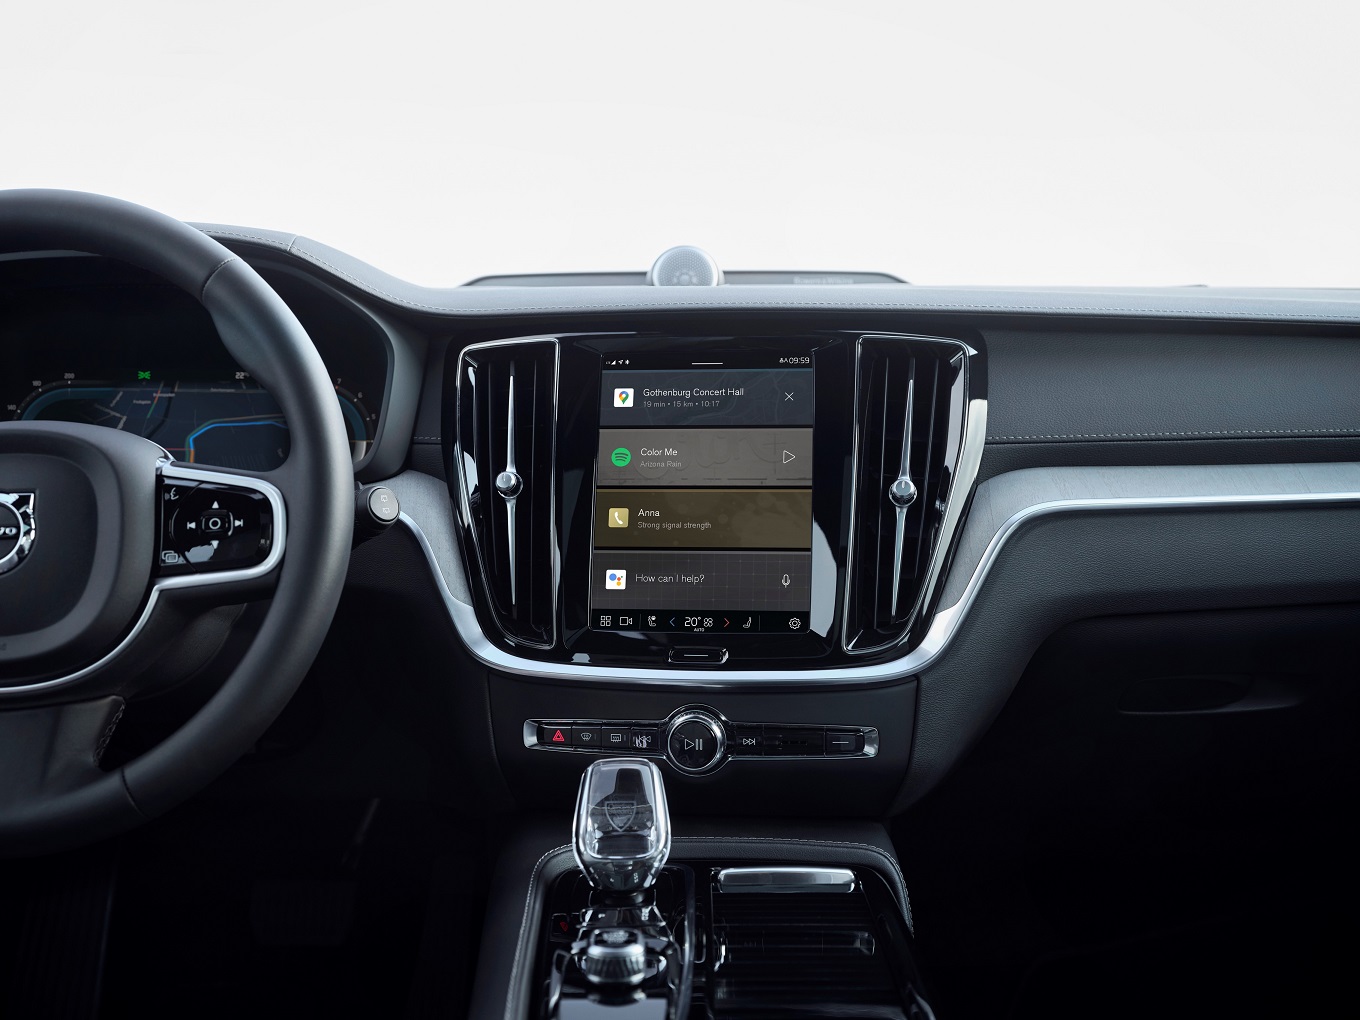 Trading Enterprises Volvo Announces Over-The-Air Software Updates in Volvo New Car Models